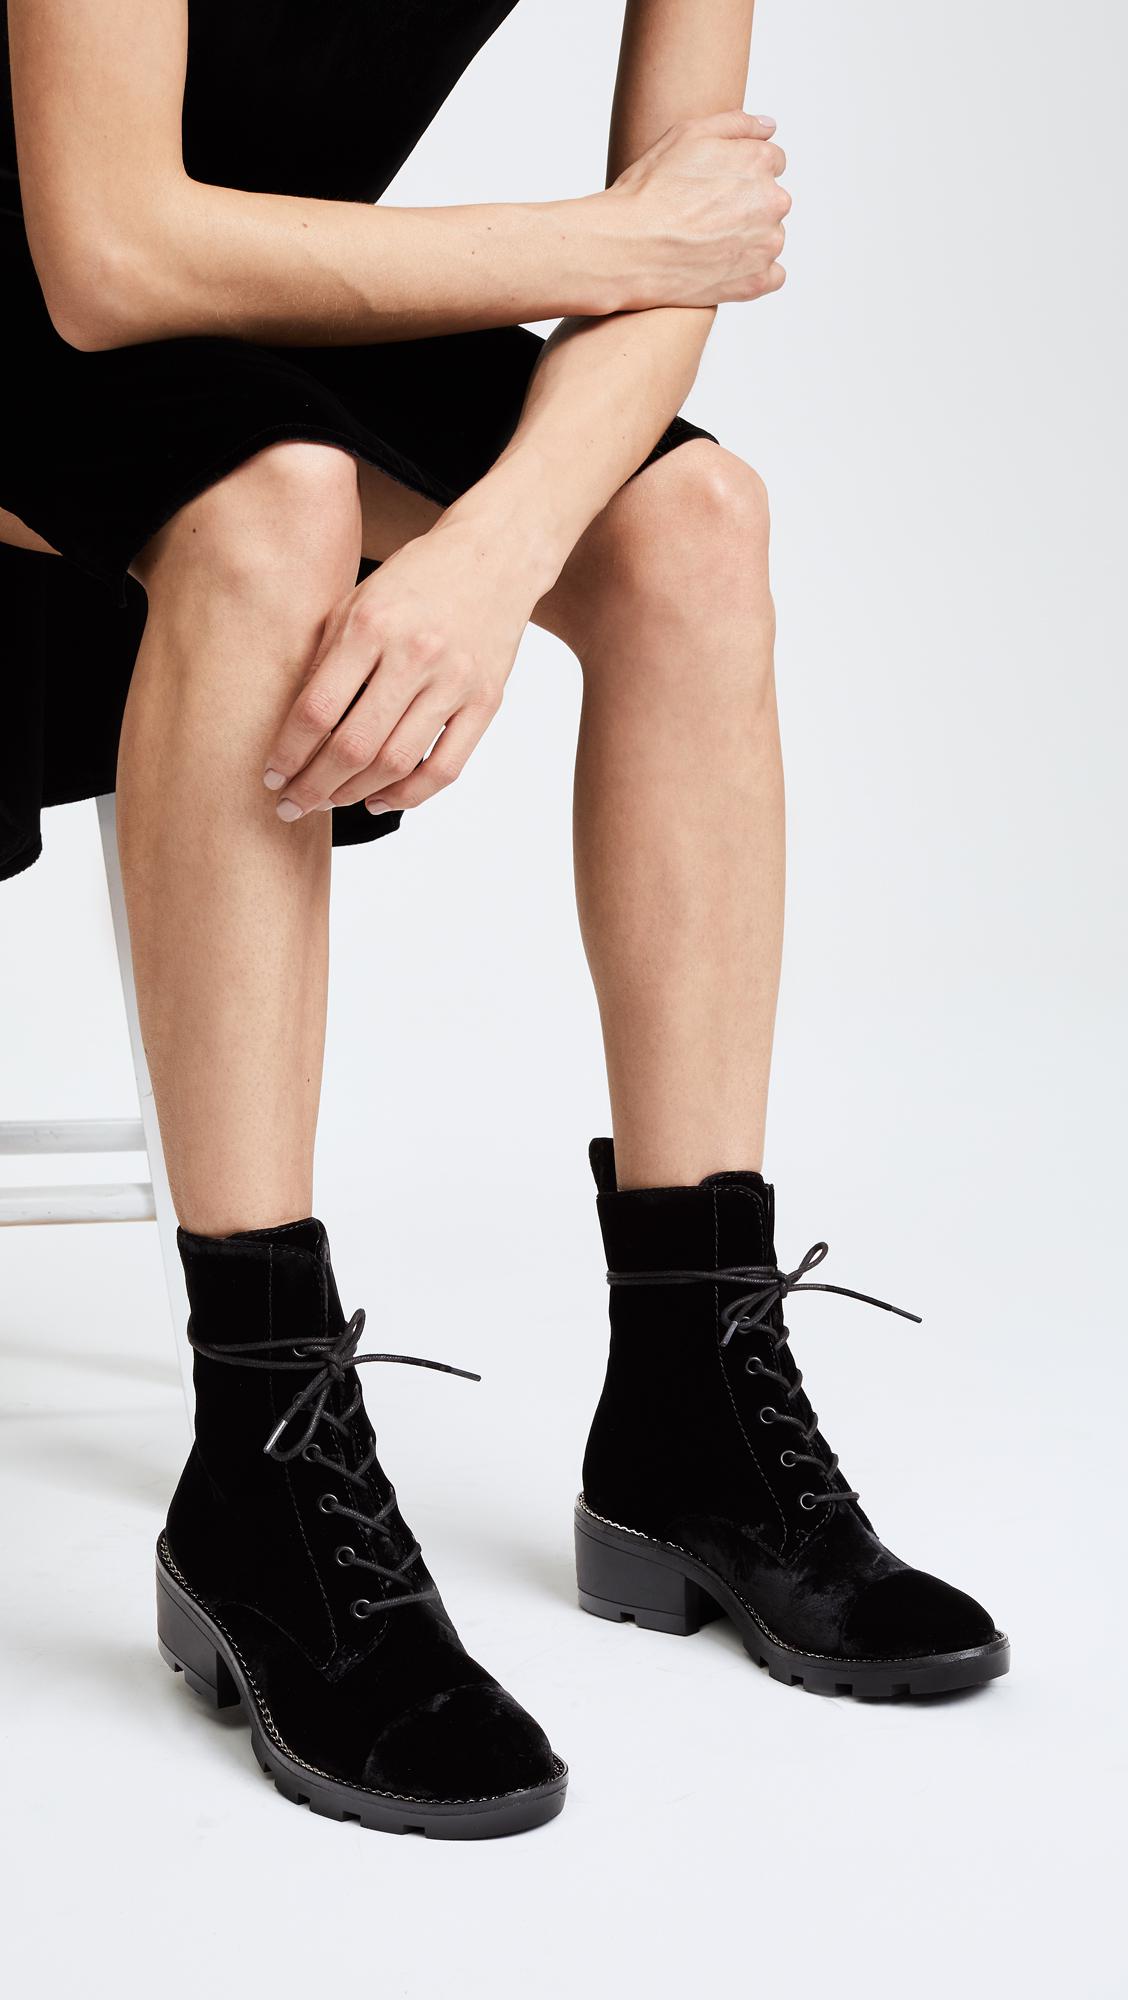 kendall and kylie park combat boots